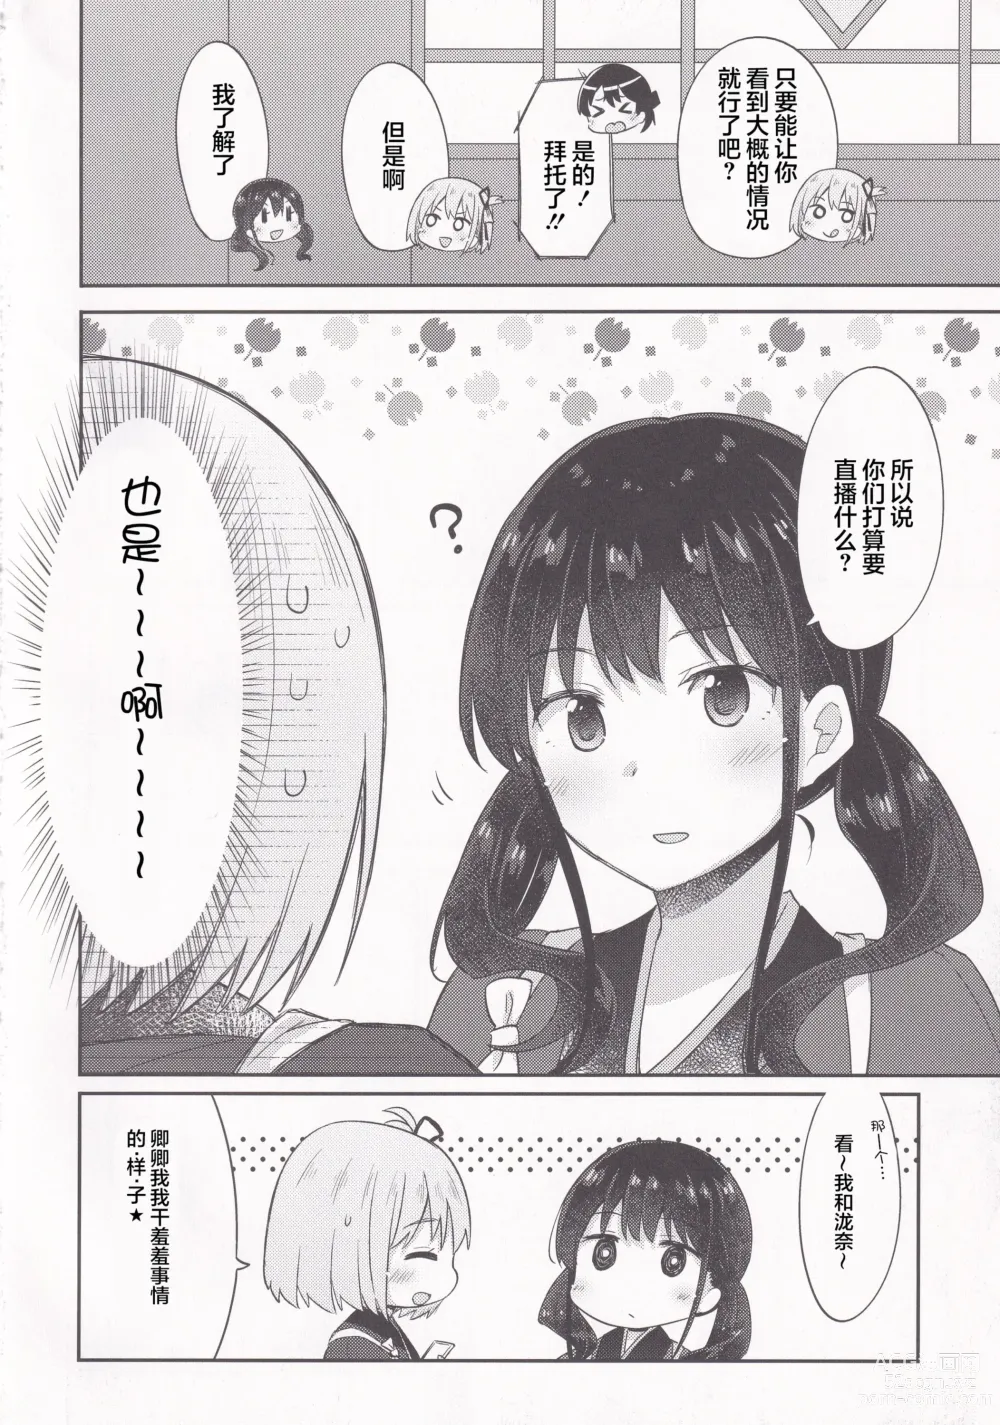 Page 7 of doujinshi 莉可利丝限定直播